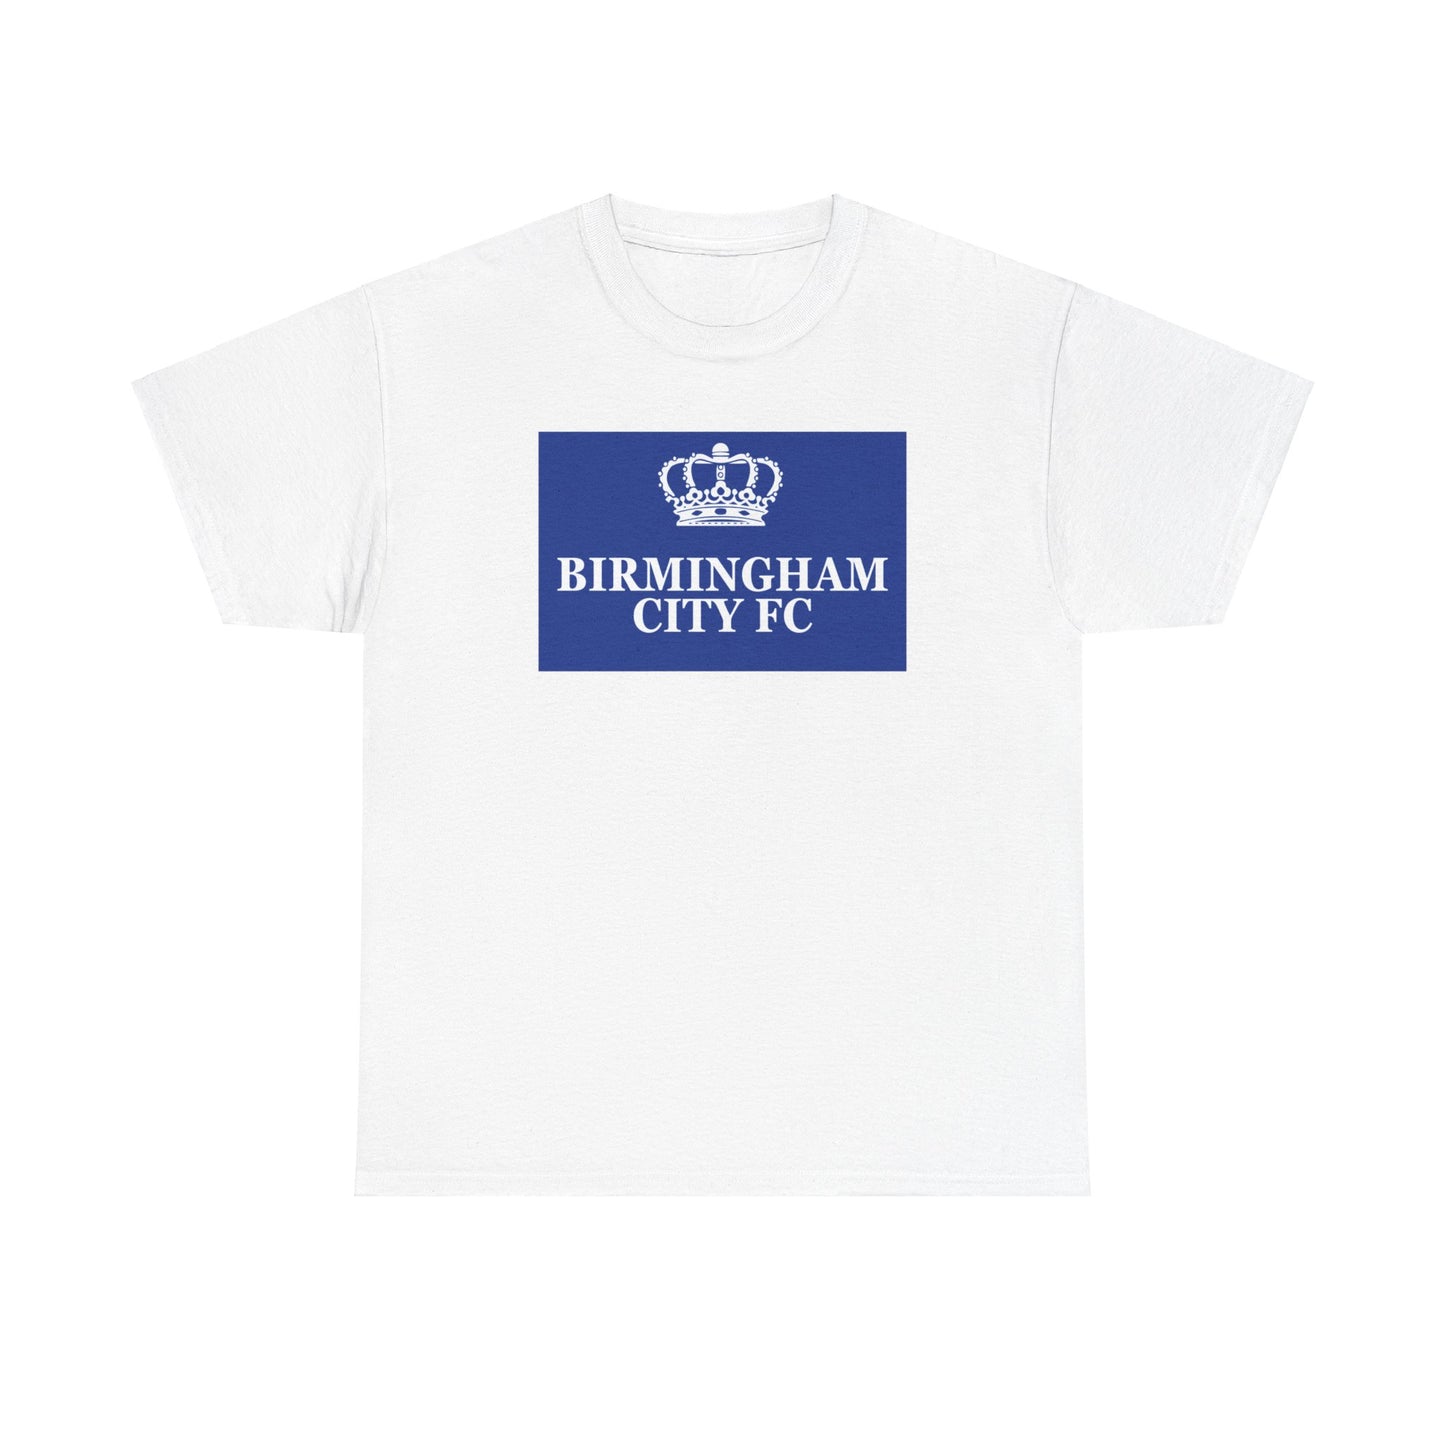 Dupe It Birmingham City FC x Offender Inspired Tee - Urban Style Meets Blue Pride